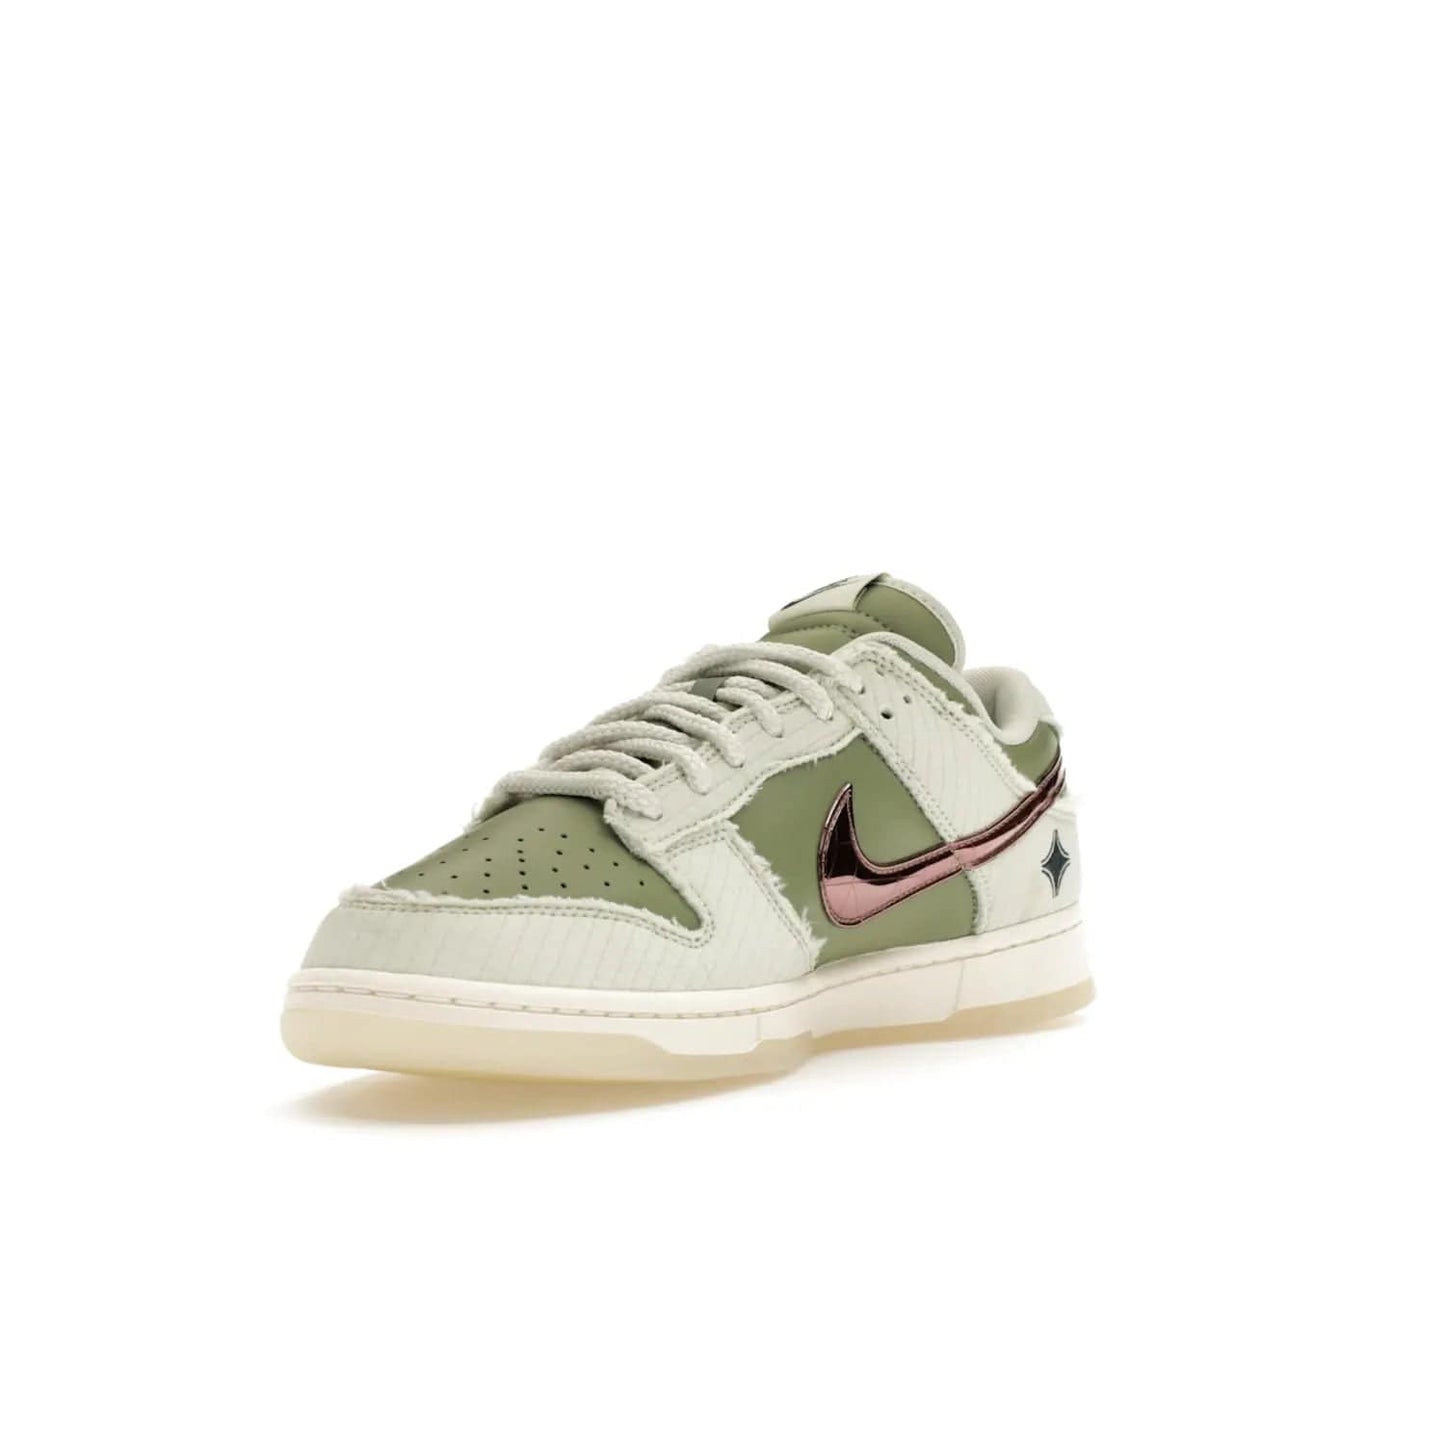 Nike Dunk Low Retro PRM Kyler Murray Be 1 of One - Image 14 - Only at www.BallersClubKickz.com - Introducing the Nike Dunk Low Retro PRM Kyler Murray "Be 1 of One"! A Sea Glass upper with Sail and Oil Green accents, finished with Rose Gold accents. Drop date: November 10th.